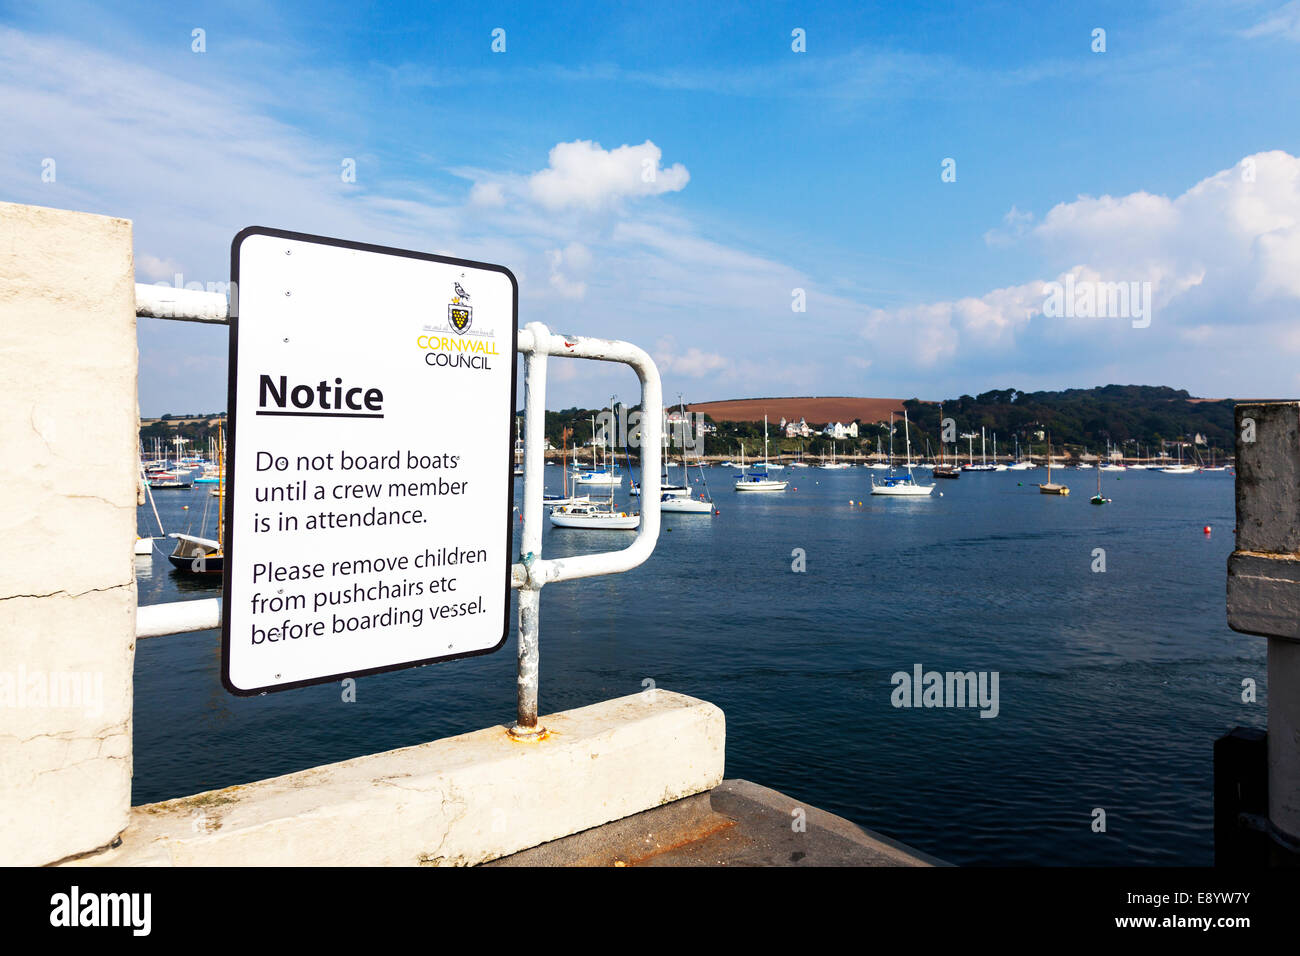 Cornwall council notice sign Falmouth do not board boats until crew member is in attendance Cornish warning UK England harbour Stock Photo